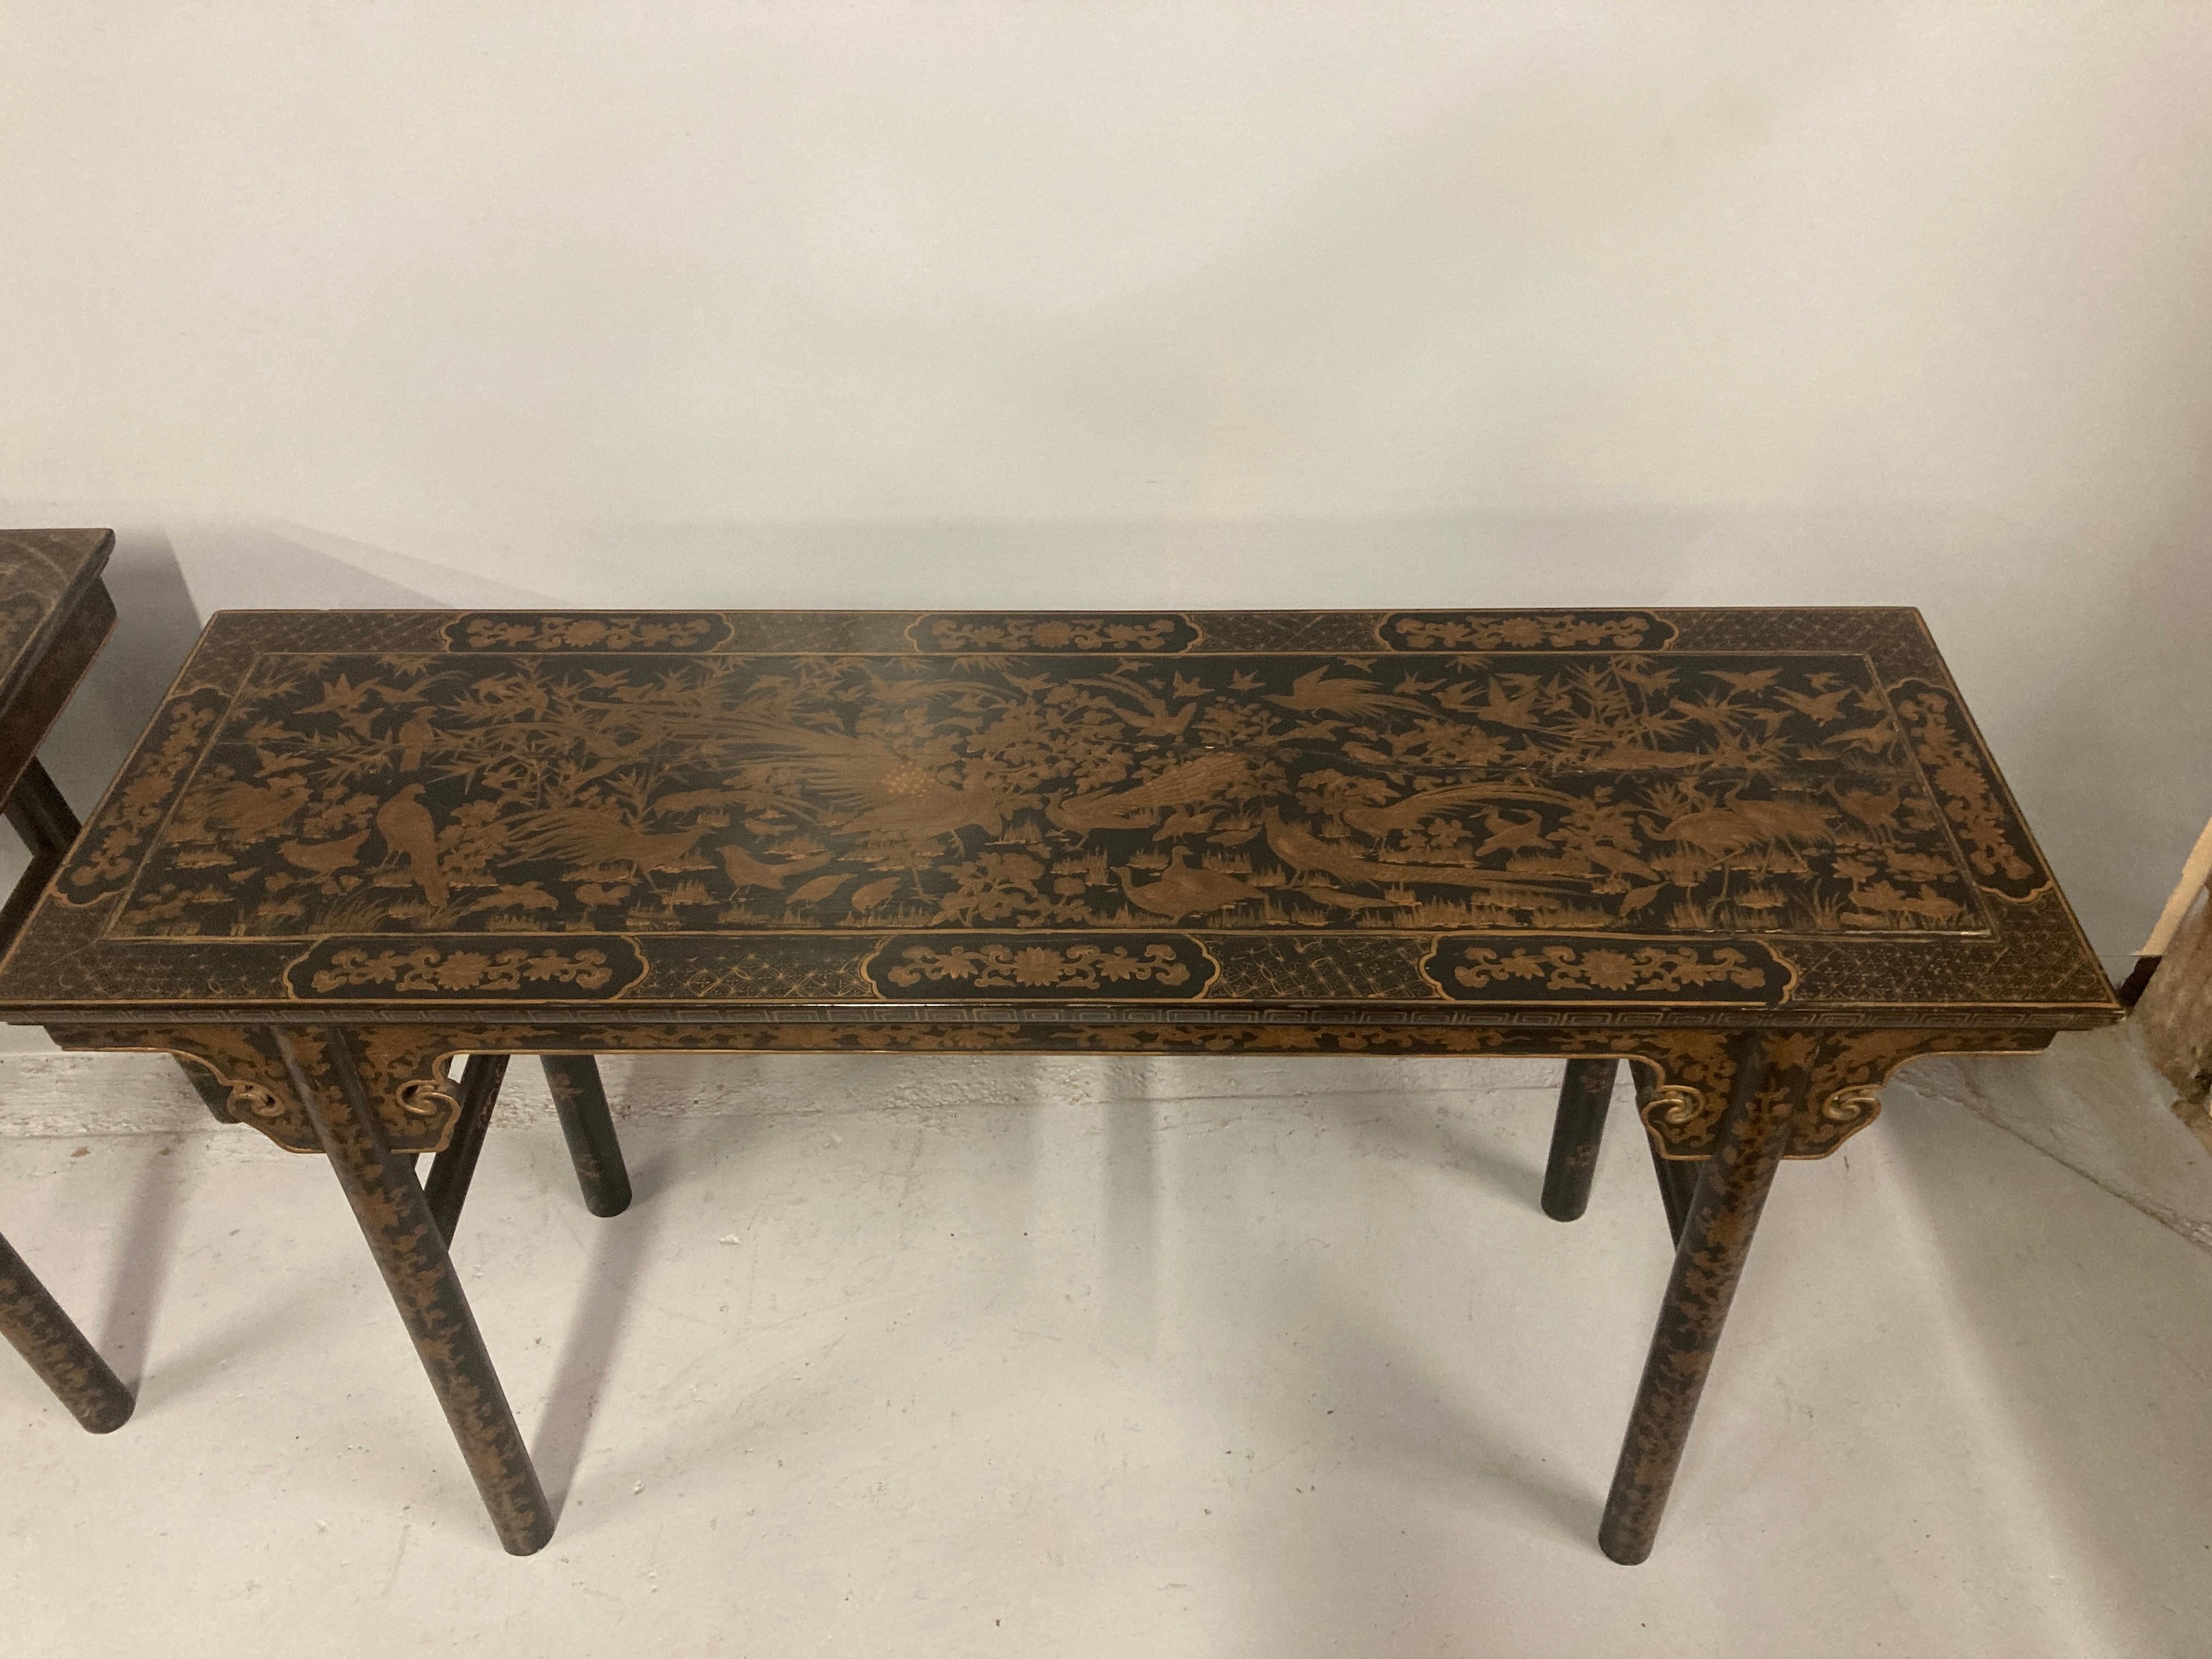 Gilt Pair of Chinese Black Lacquer Tables with Gilded Decoration